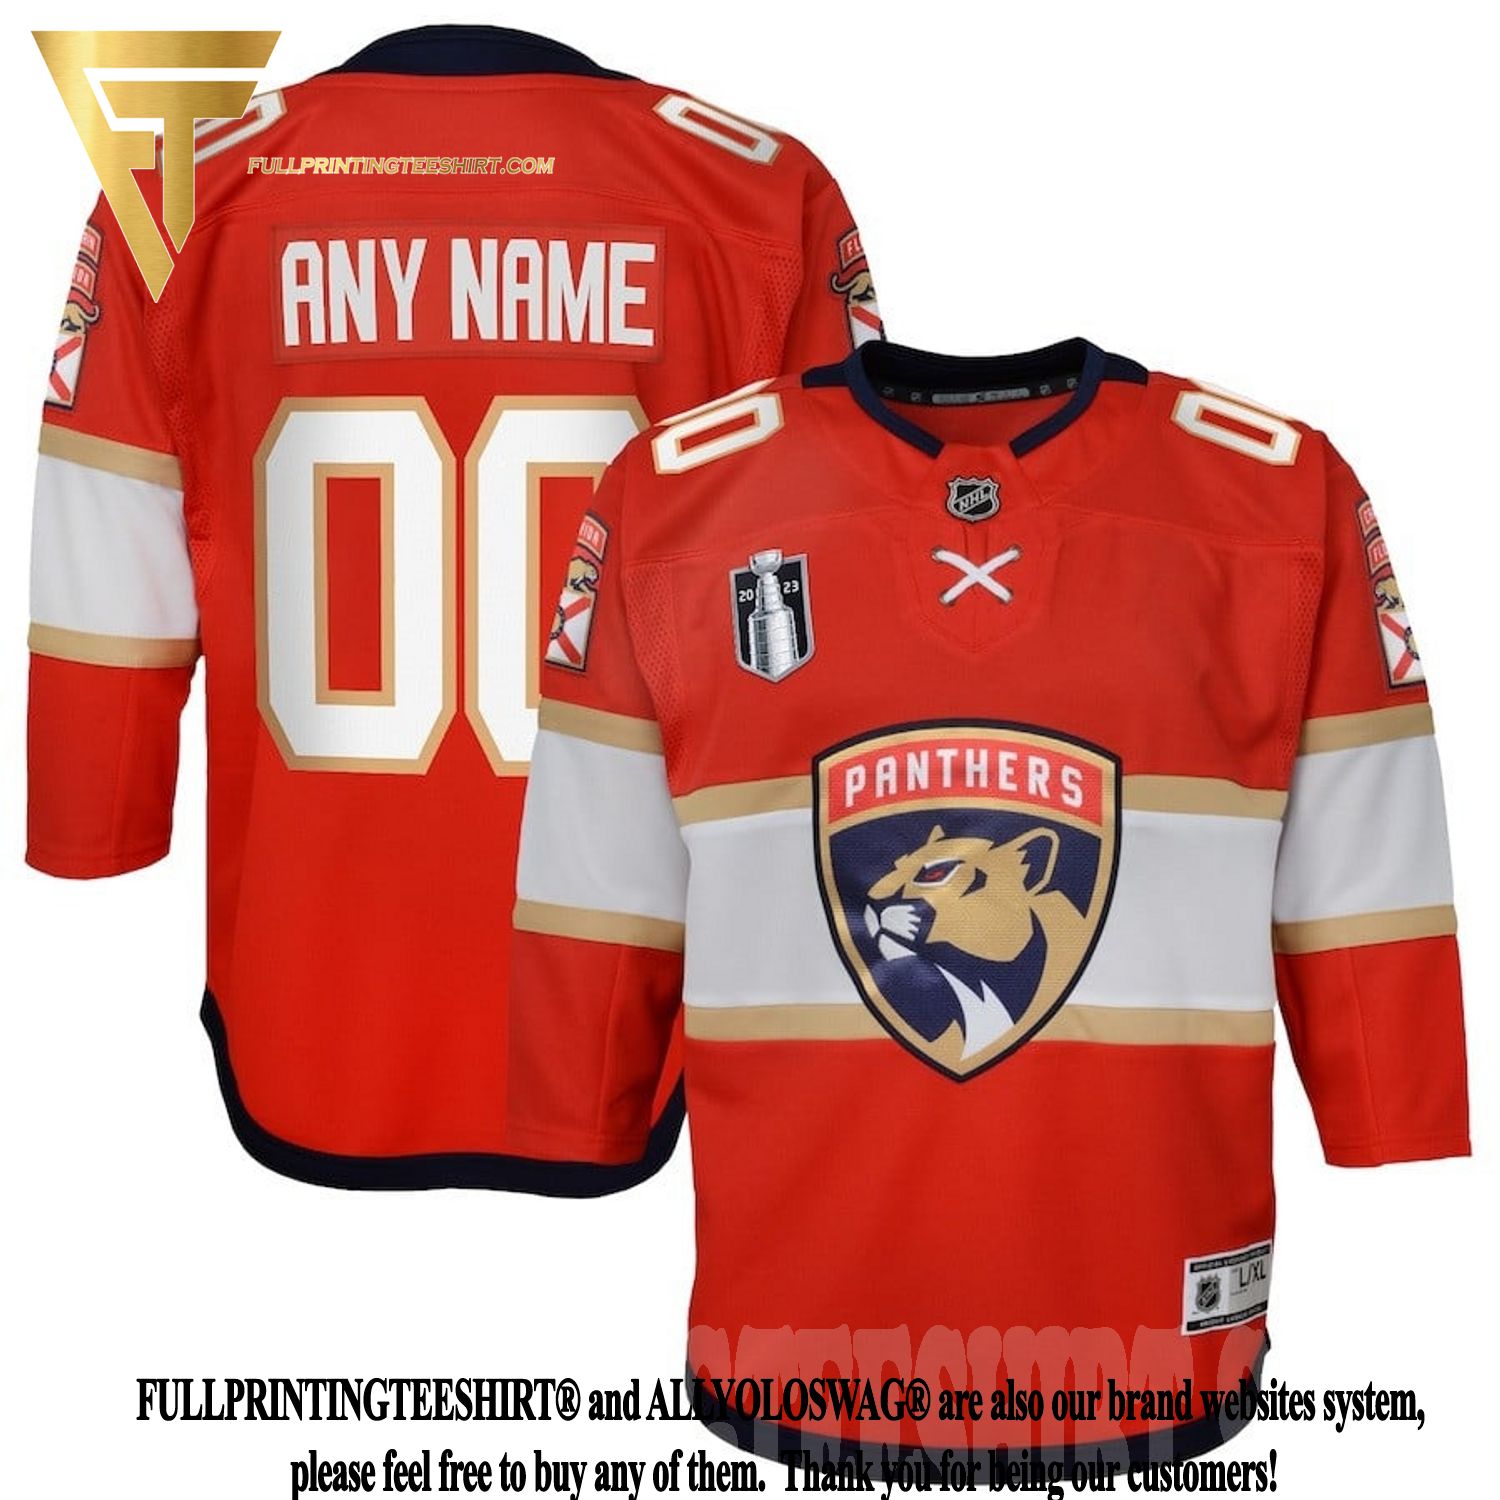 Florida Panthers Stanley Cup winner jersey